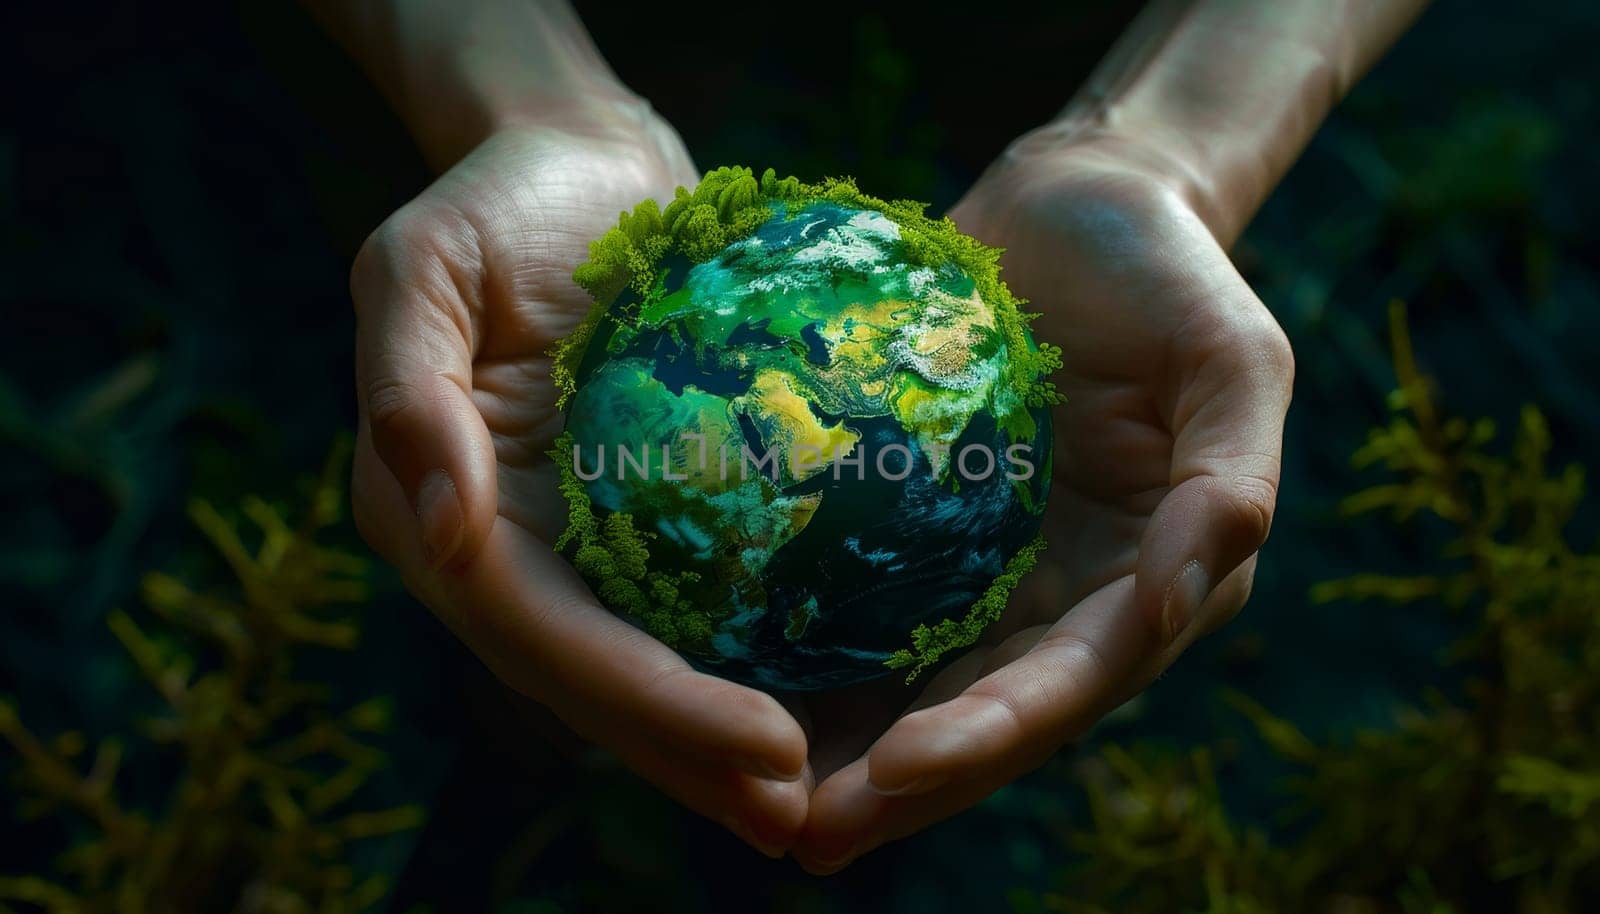 A person is holding a globe in their hands by AI generated image.